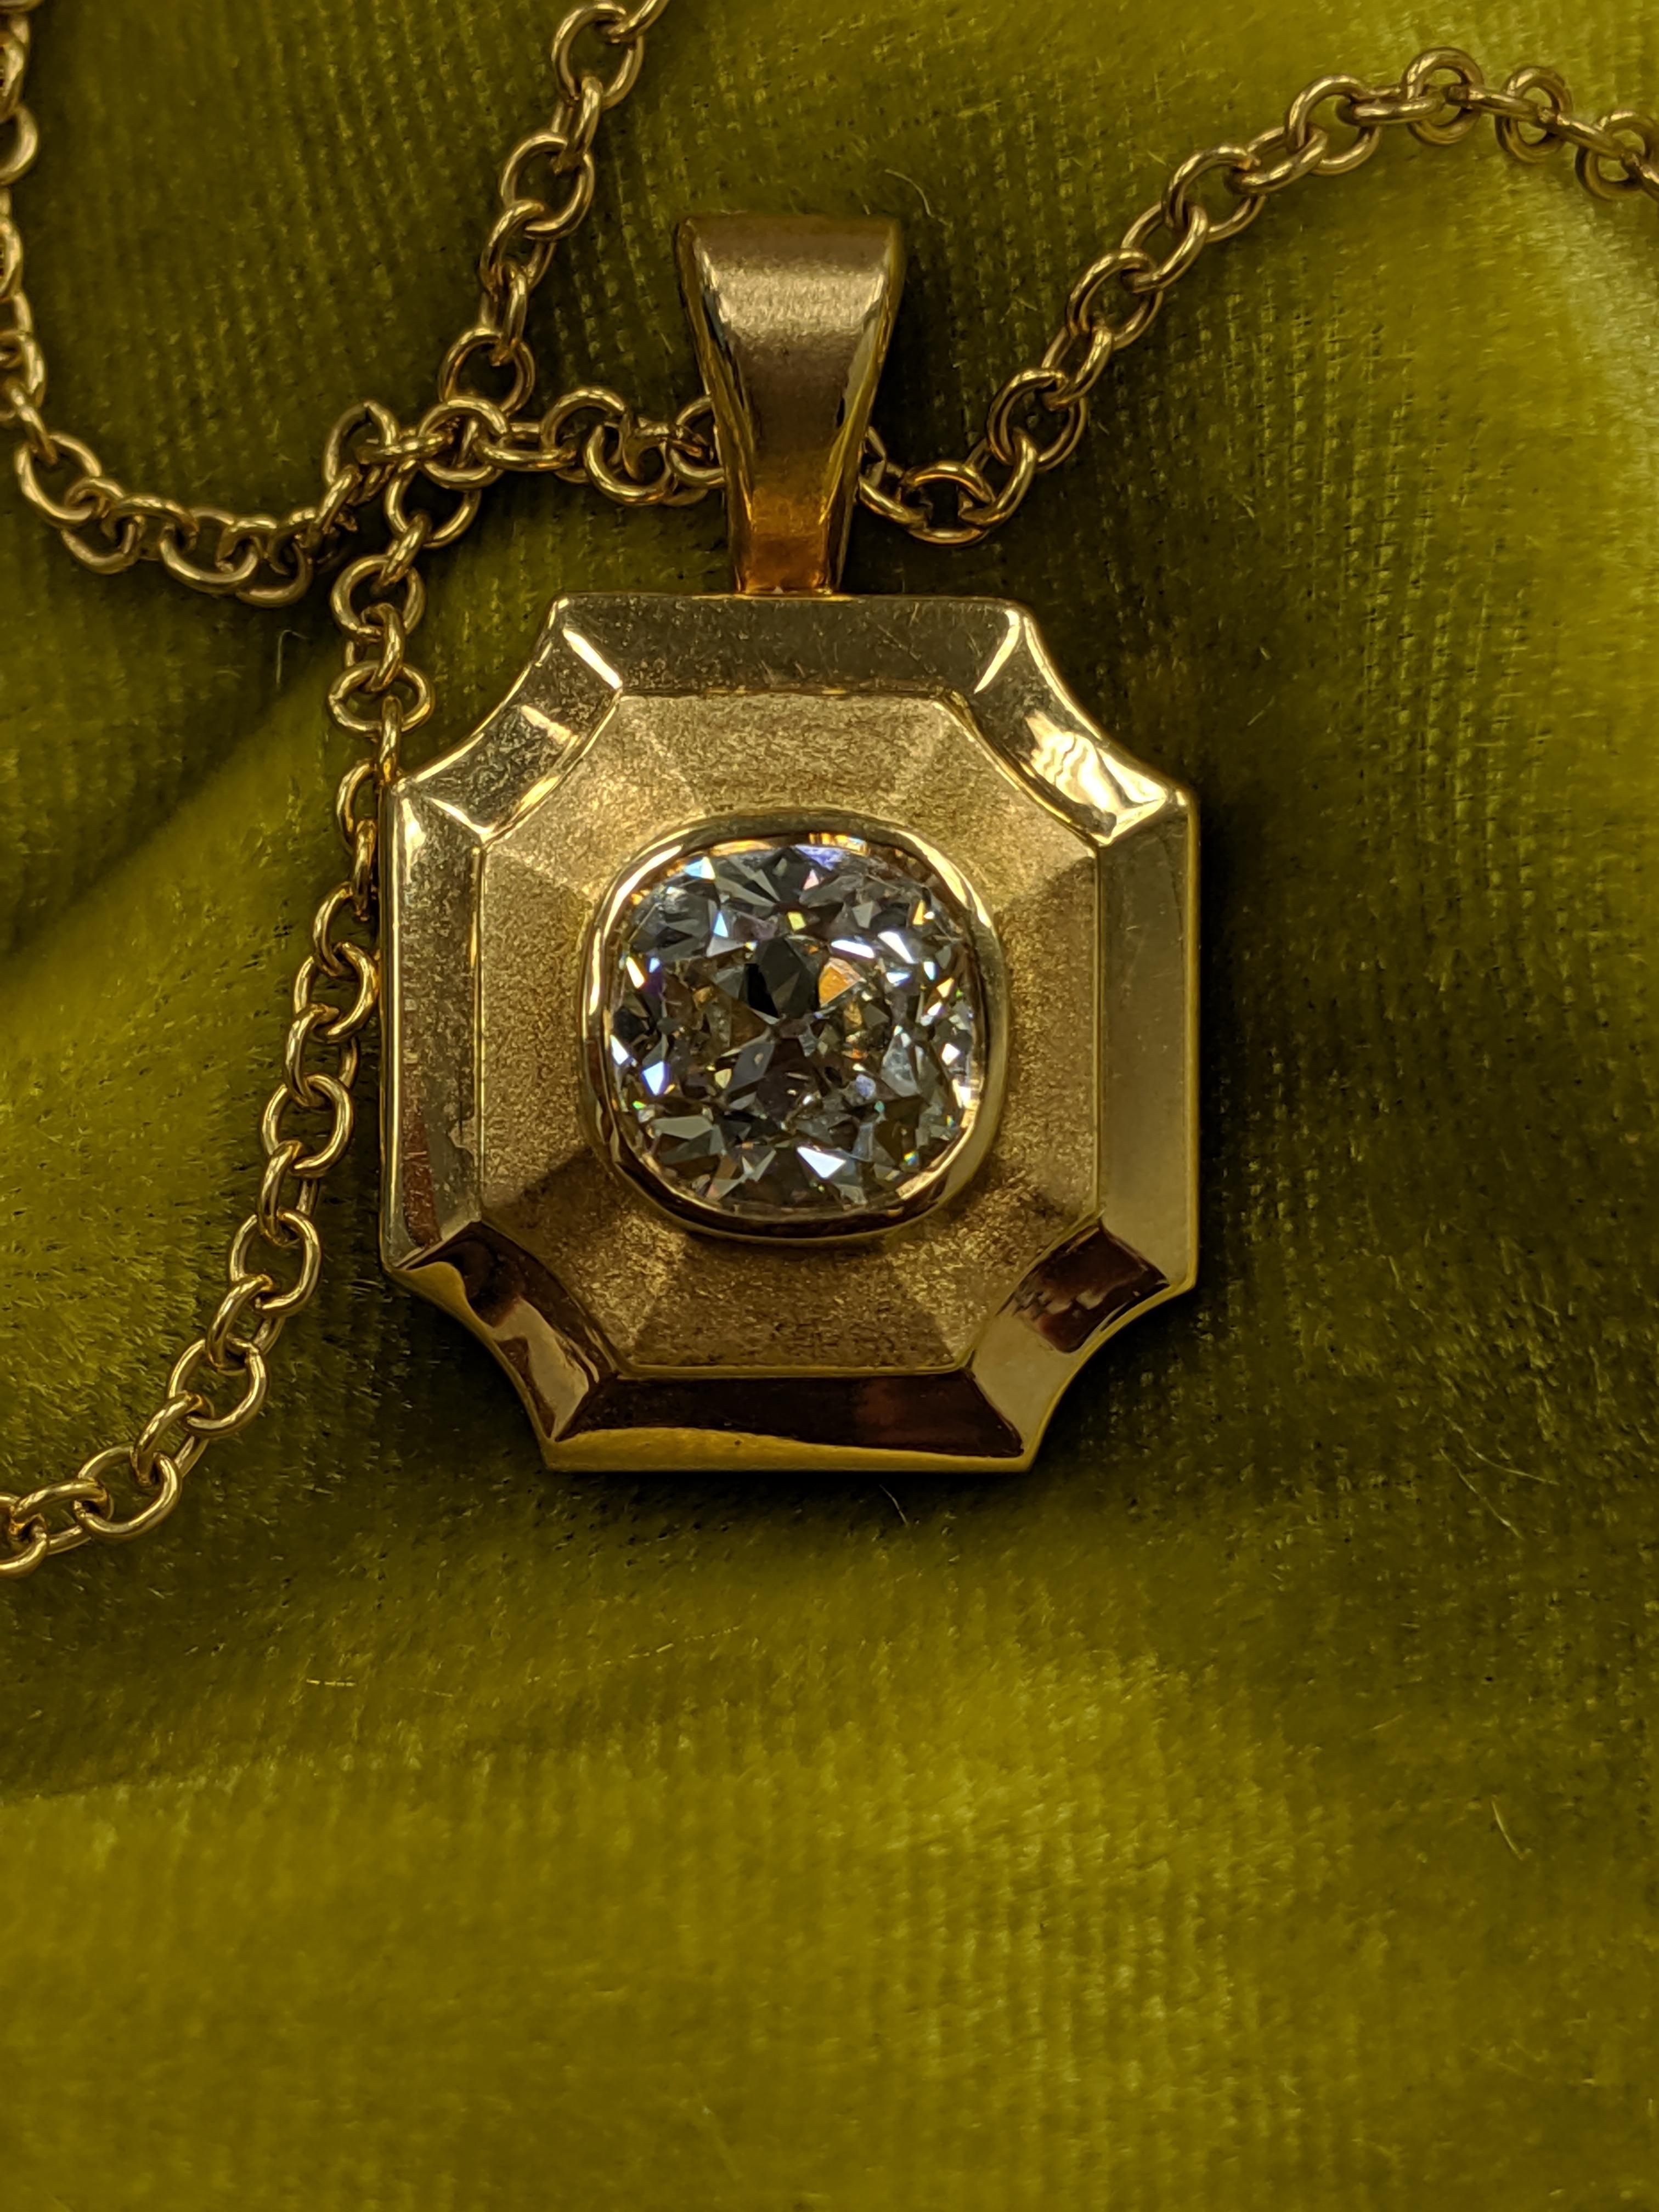 This modern classic combining a handmade locket in high karat gold with a larger Antique Cut Cushion Diamond is rare in the marketplace.  Uniquely online with 1stDibs, this Locket made by E.A. Guild features a two carat cushion cut diamond.  The